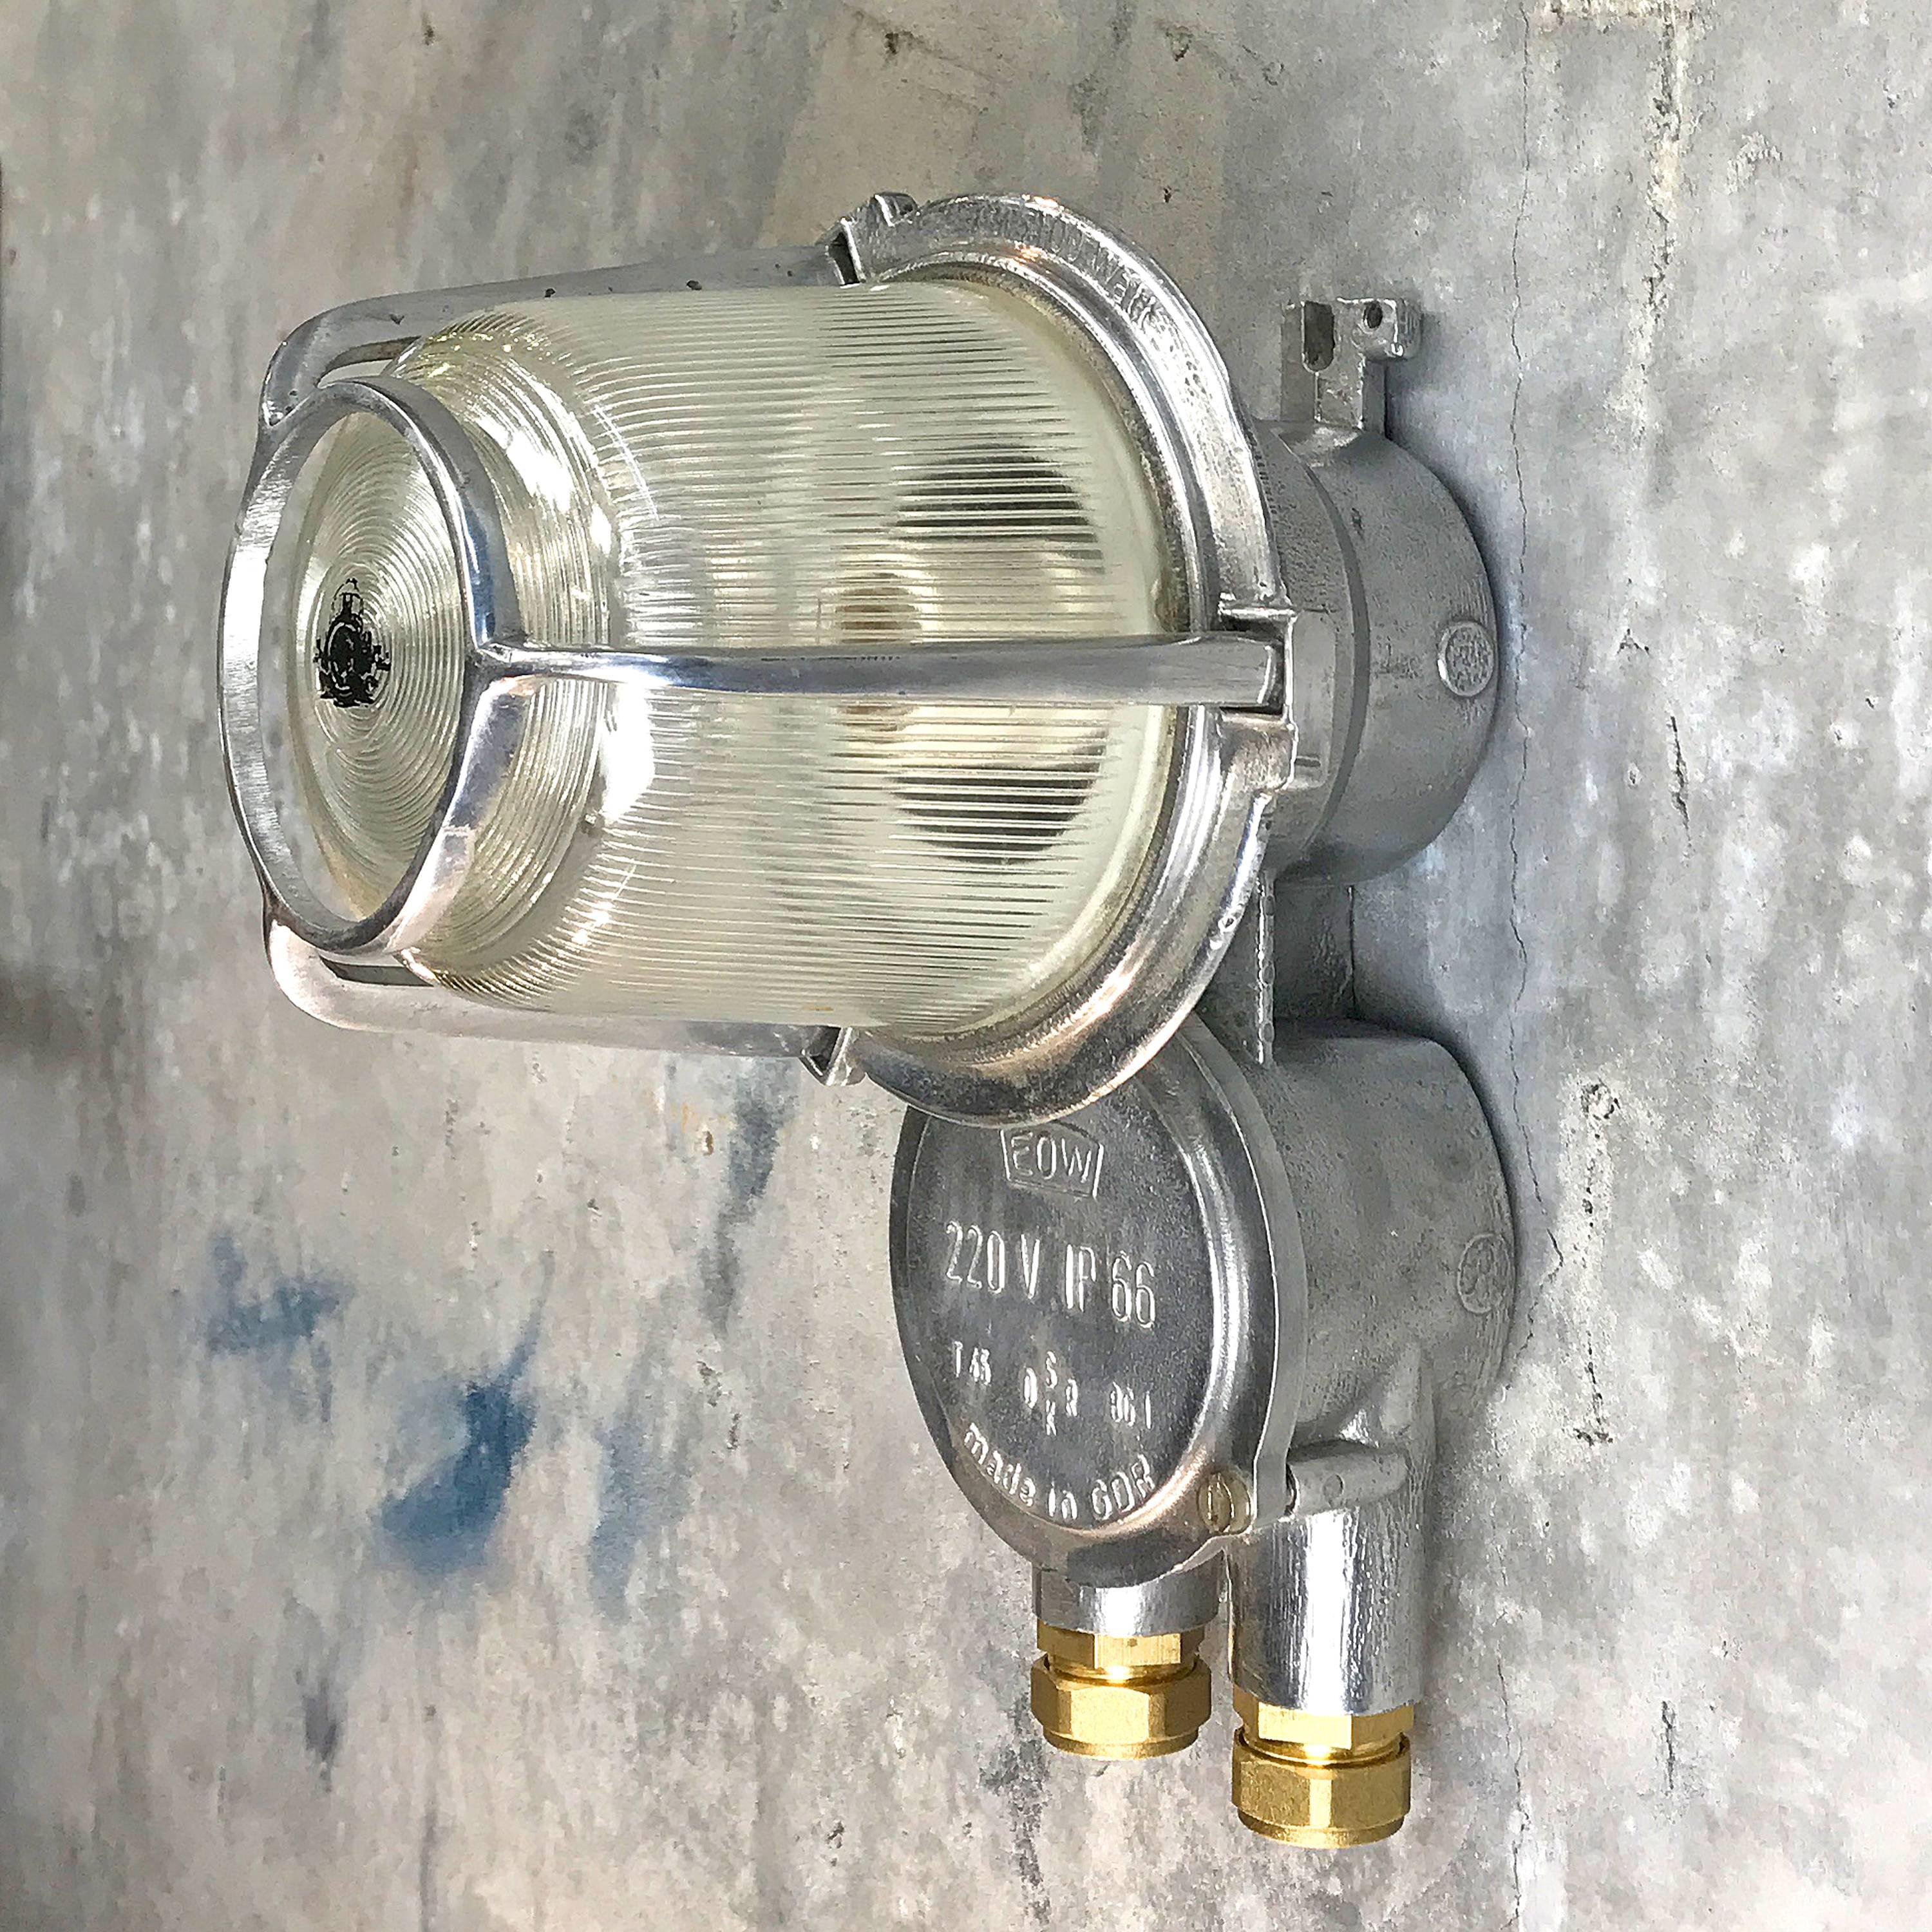 1970s East German Eow Aluminium Industrial Wall Light with Diffuser Glass Dome  In Excellent Condition For Sale In Leicester, Leicestershire